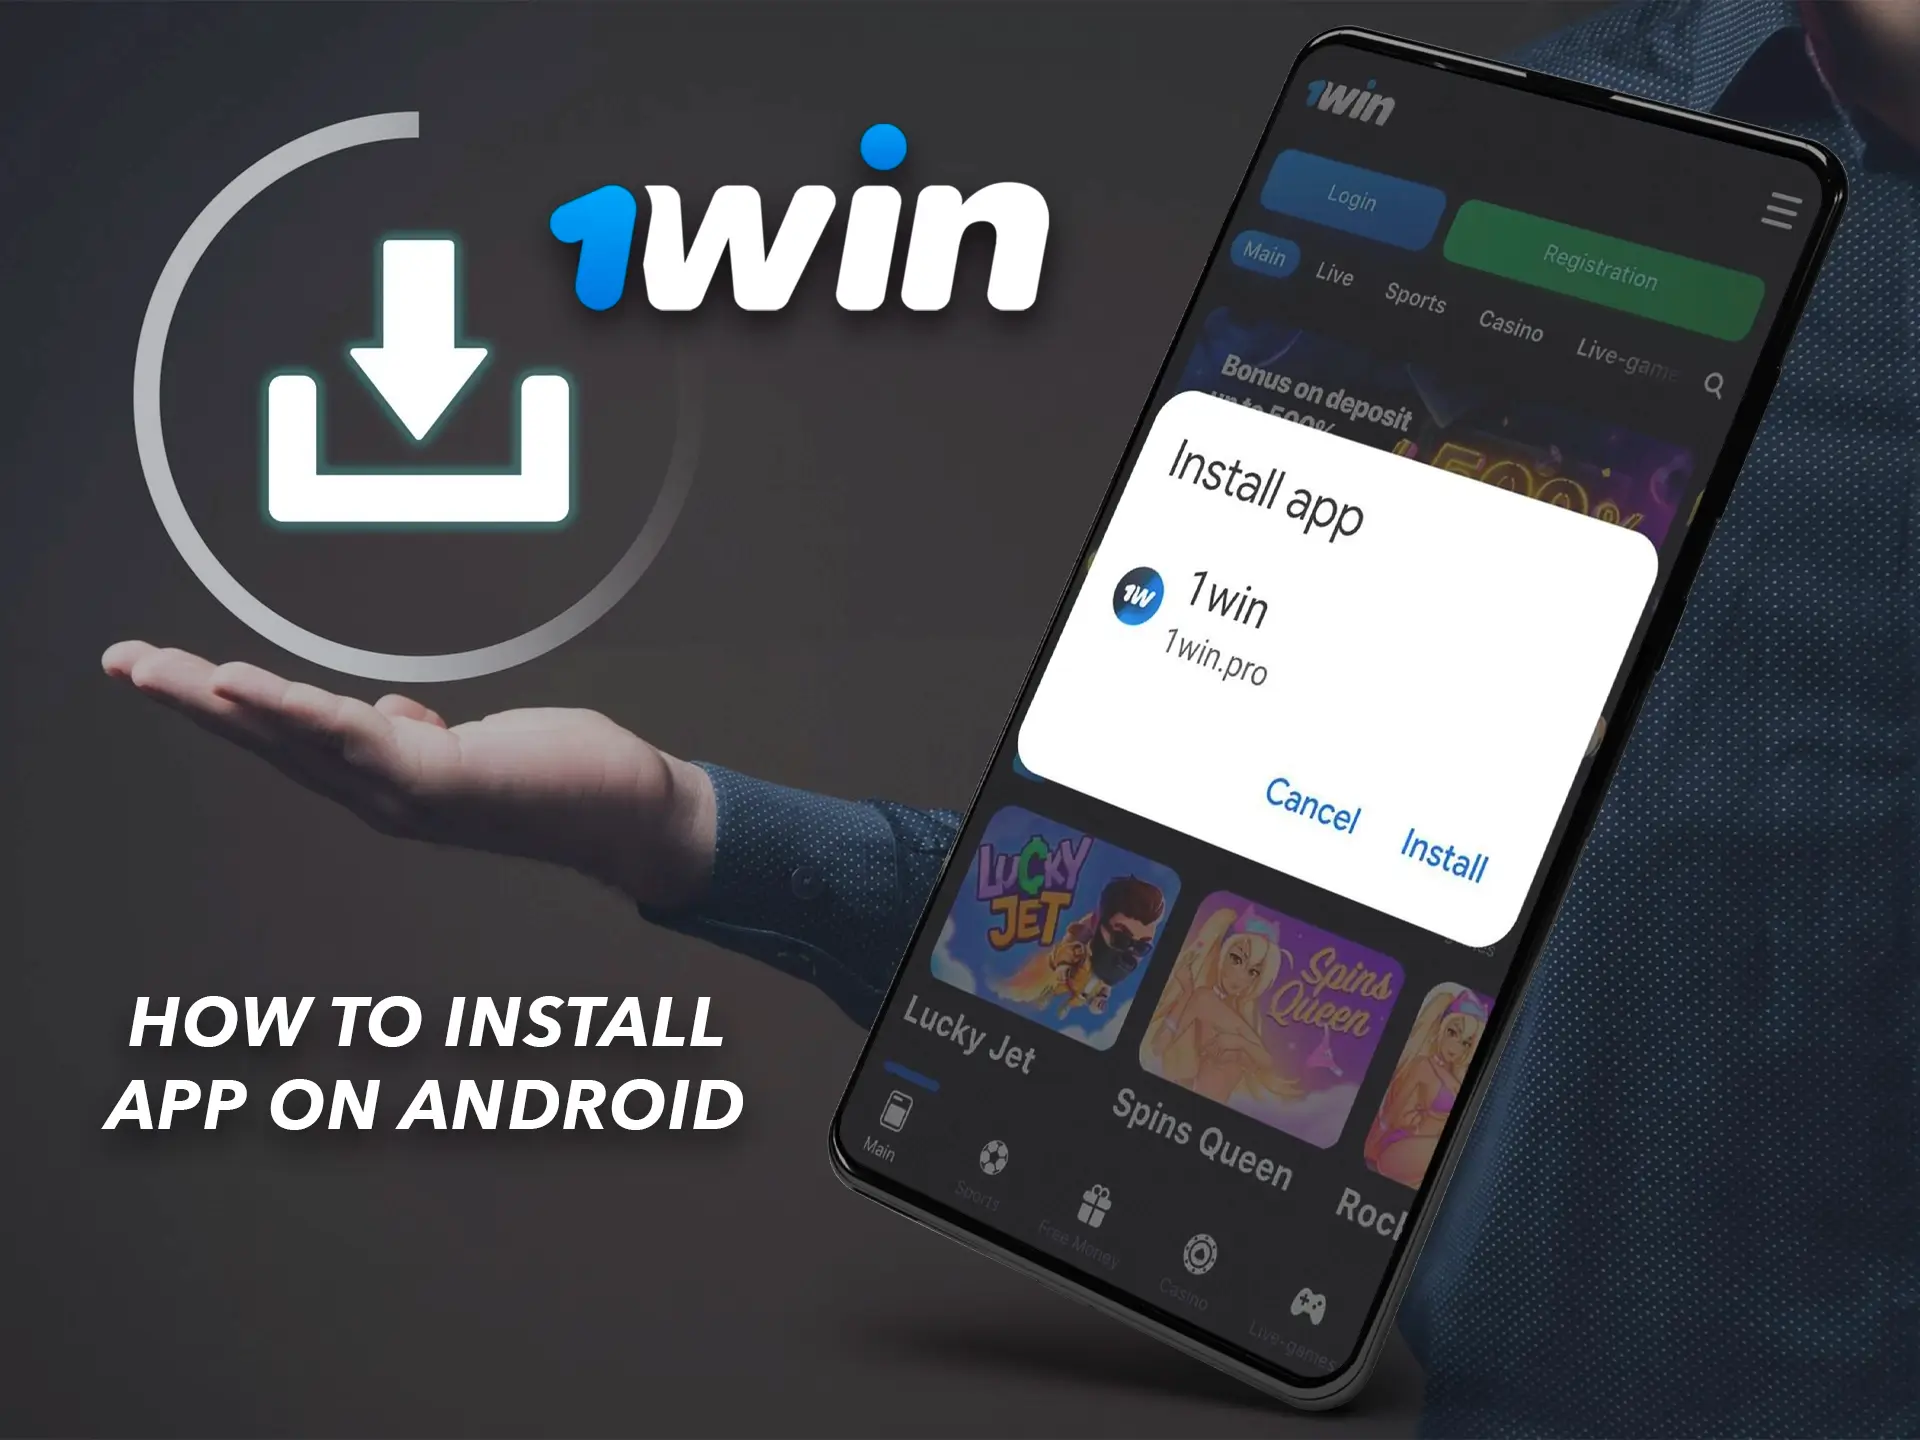 Open the 1Win website and start installing the app on your android device.